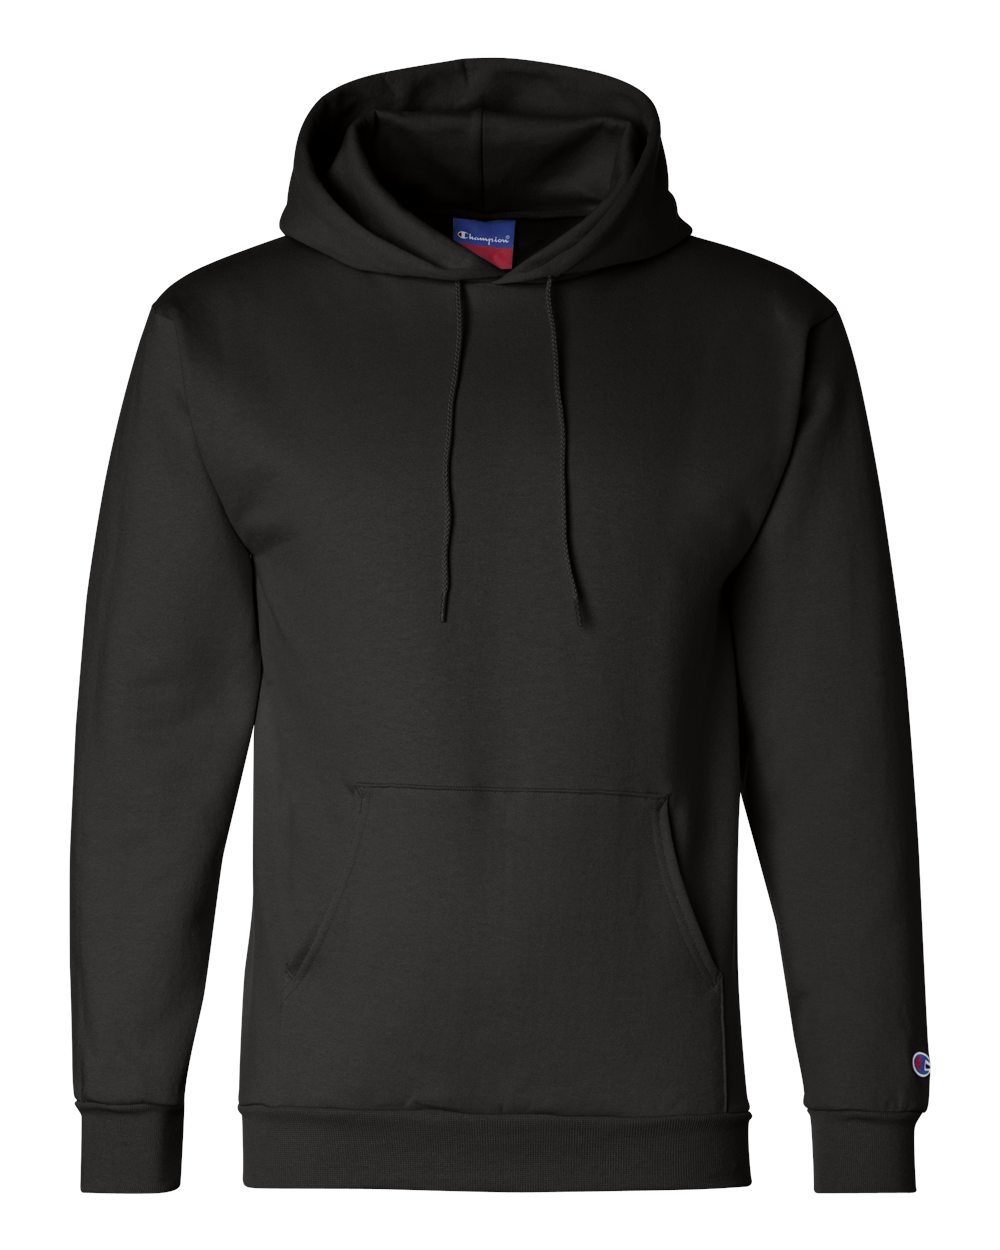 fully customizable champion power blend hoodie pullover sweater for your brand in multiple colors